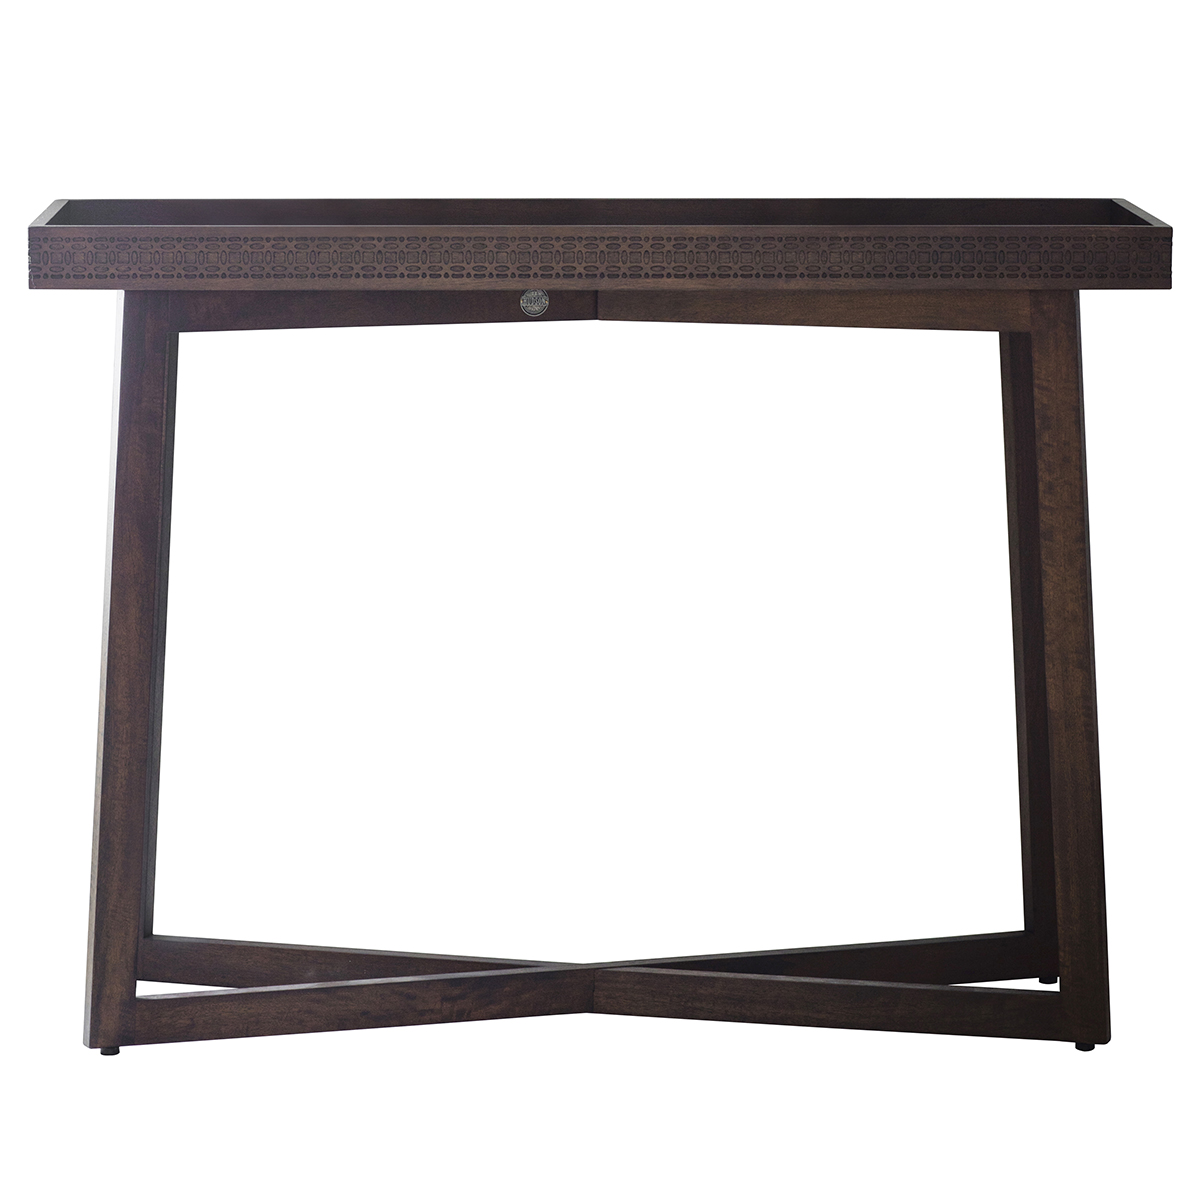 Gallery Direct Boho Retreat Console Table